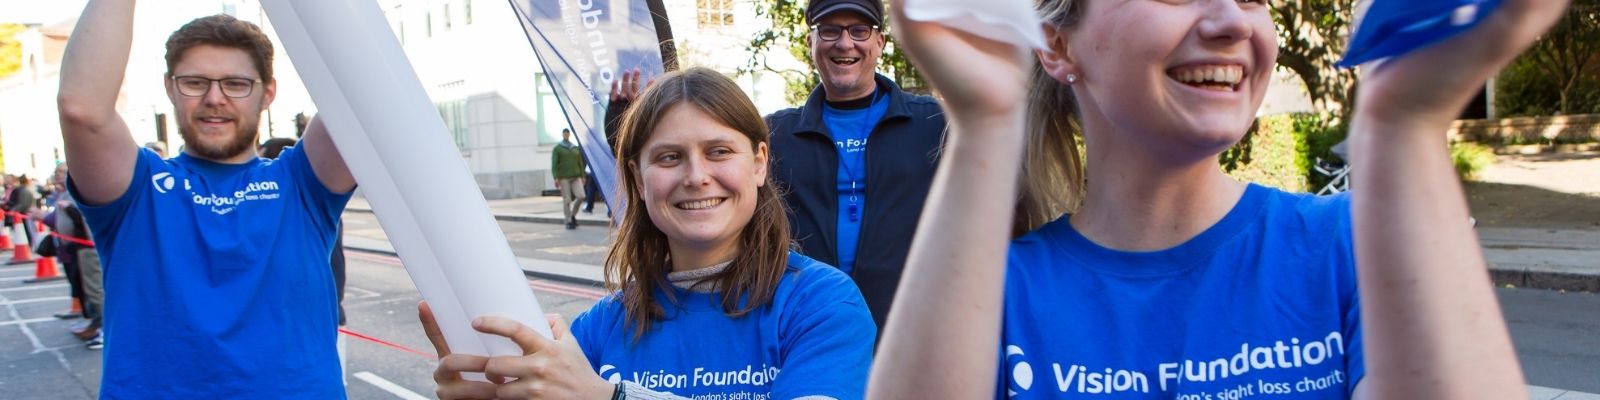 Four people cheering with blue Vision Foundation t-shirts